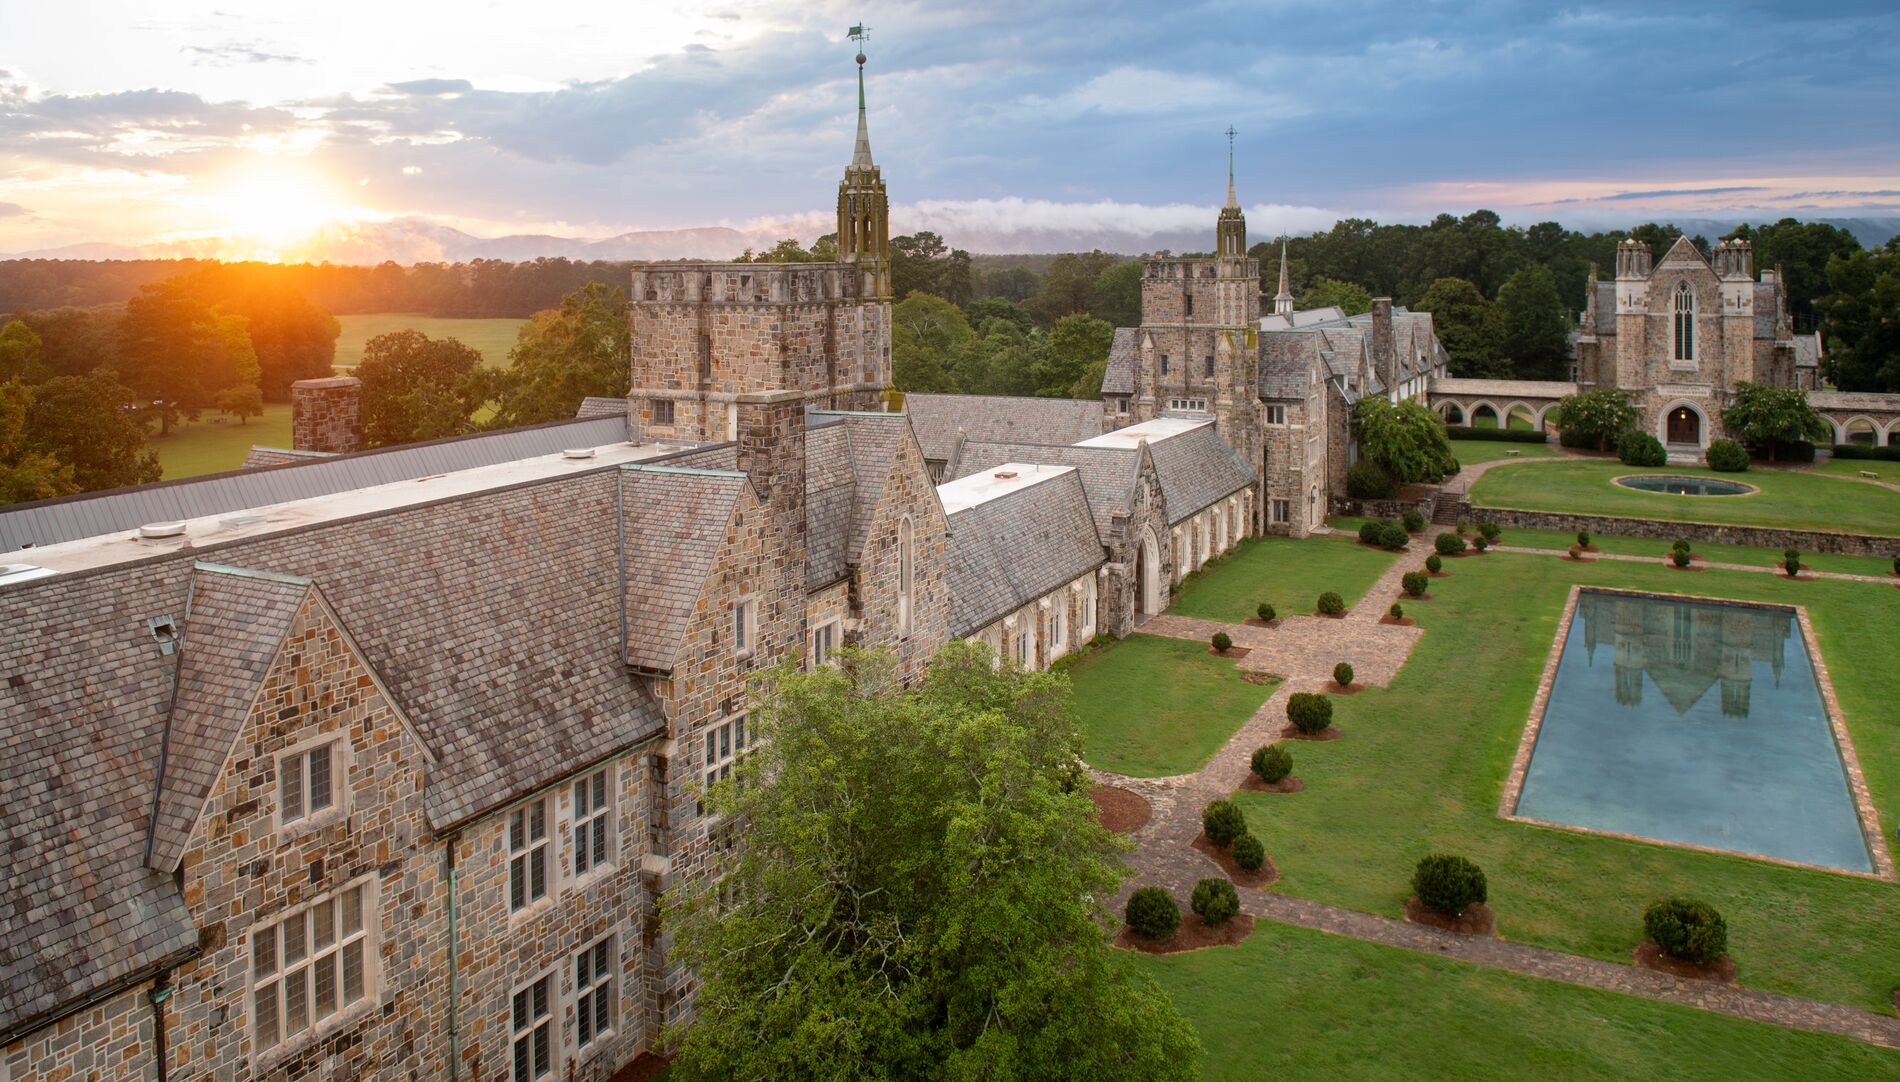             Revealed: The most beautiful universities in the world     